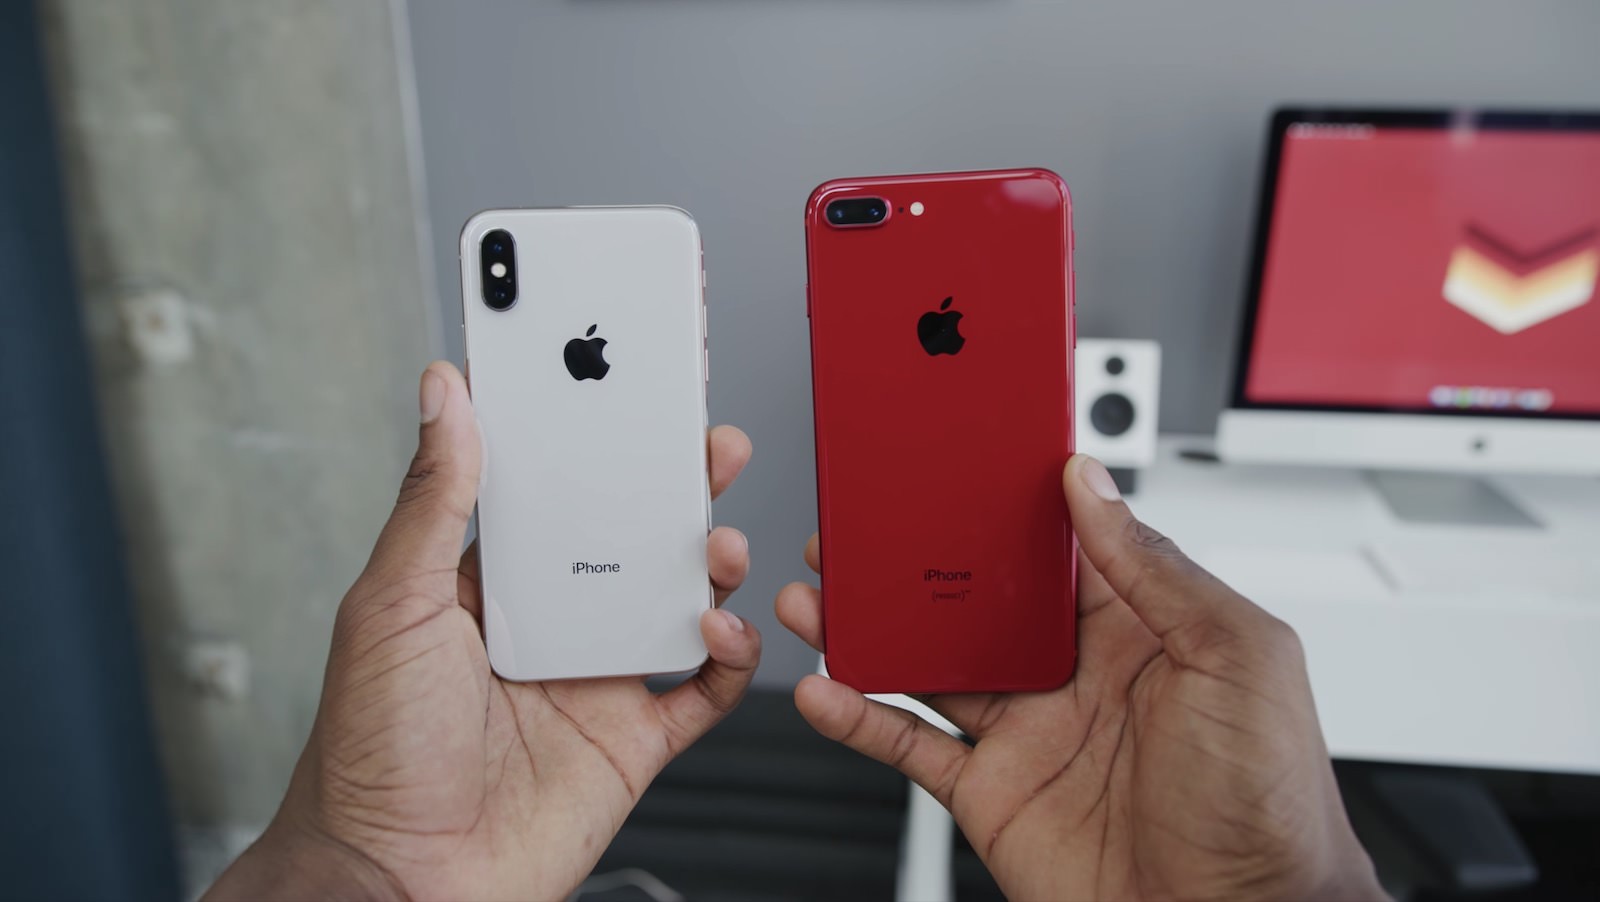 iPhone8-product-red-mkbhd-review-4.jpg